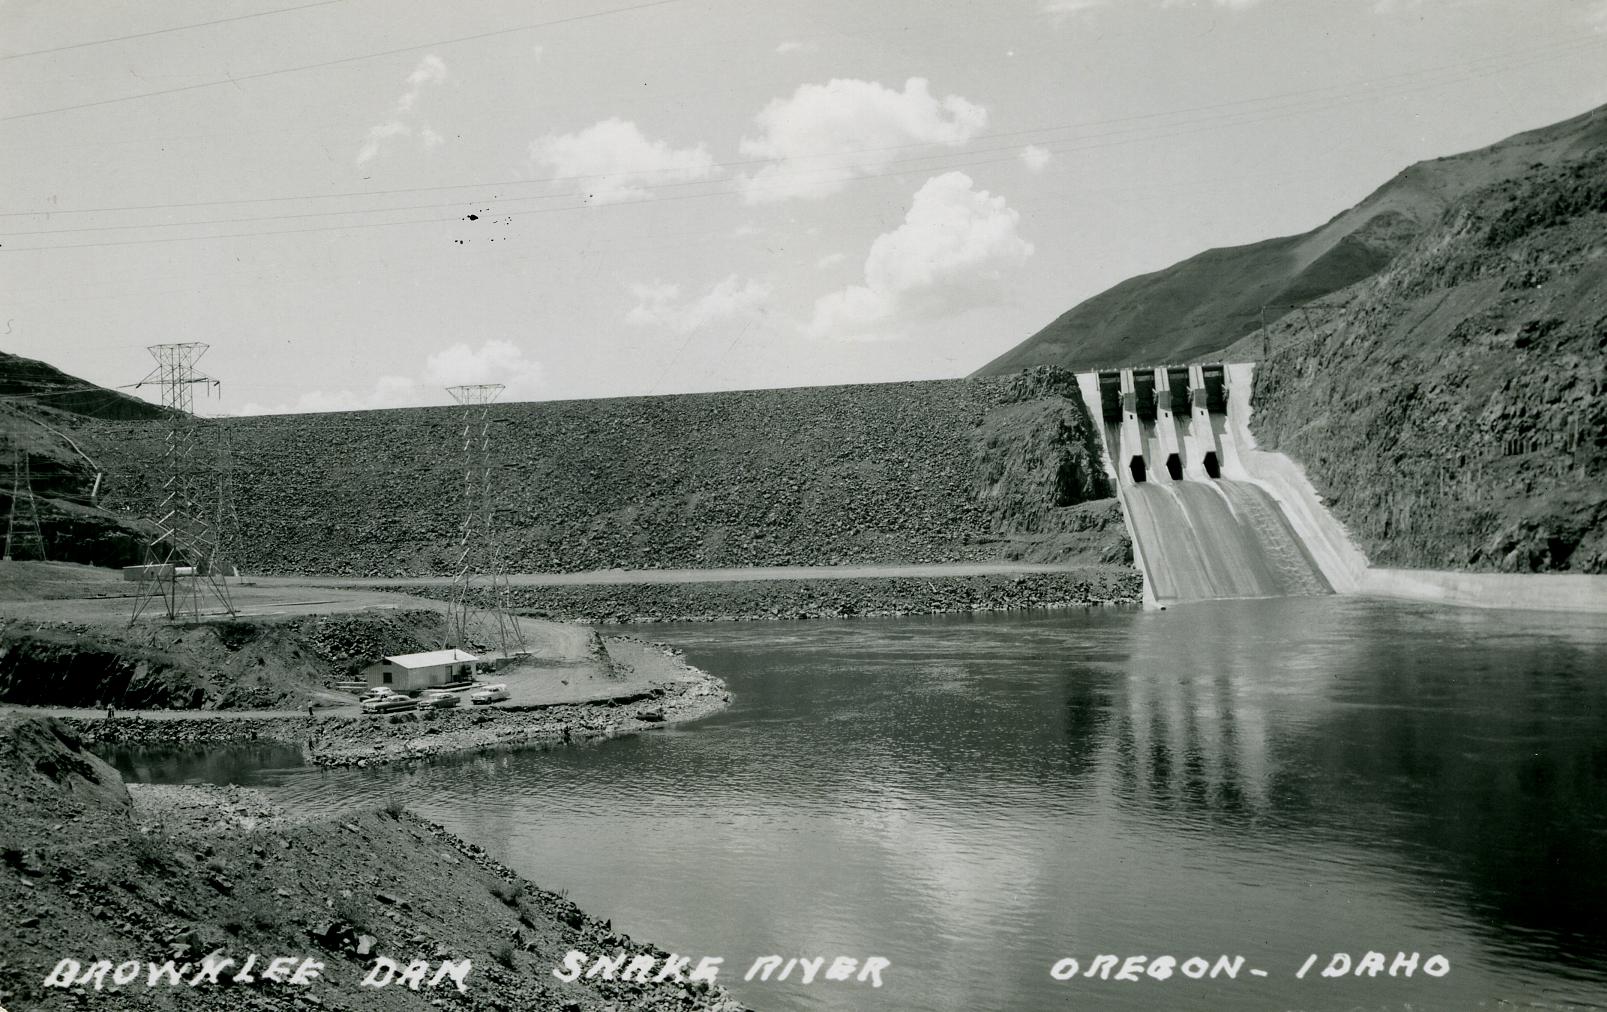 Black-and-white photograph of Brownlee Dam on the Snake River, Idaho-Oregon border. The photo shows a gravel dam view looking upstream. A narrow concrete spillway occurs on the right side of the dam. Some power lines can be seen on the left riverbank.